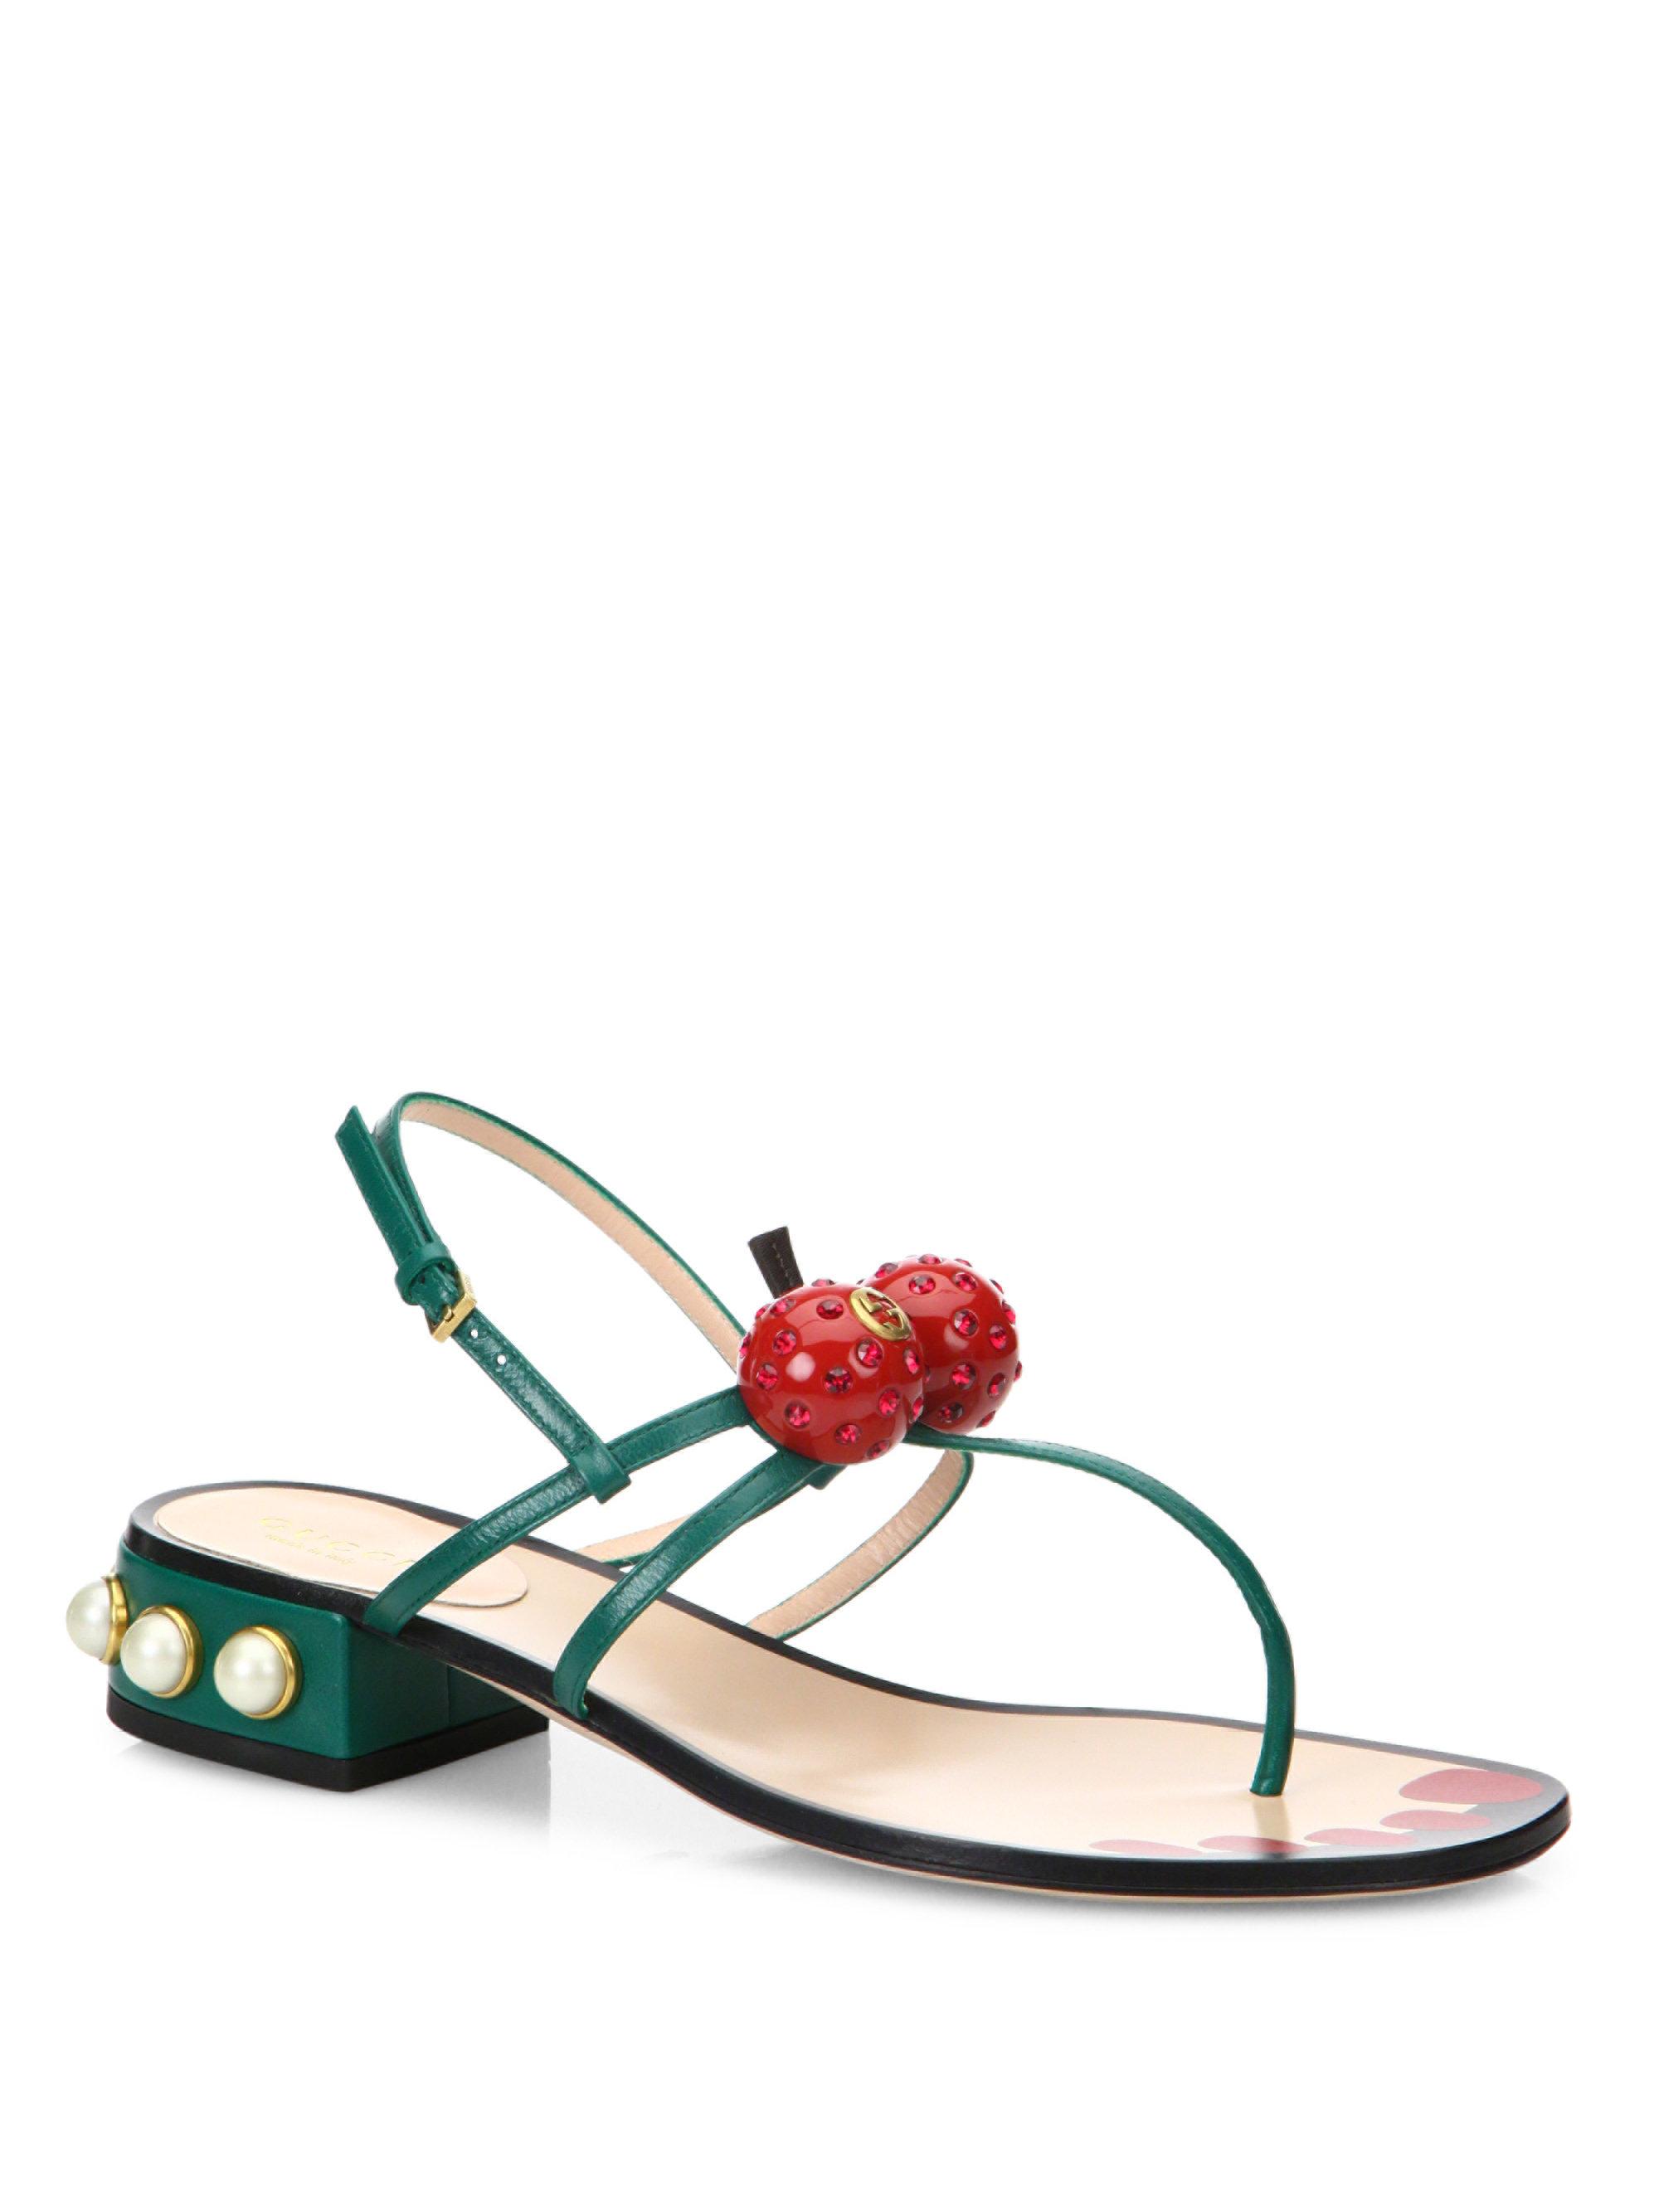 Gucci Hatsumomo Cherry Leather Thong Sandal | Lyst